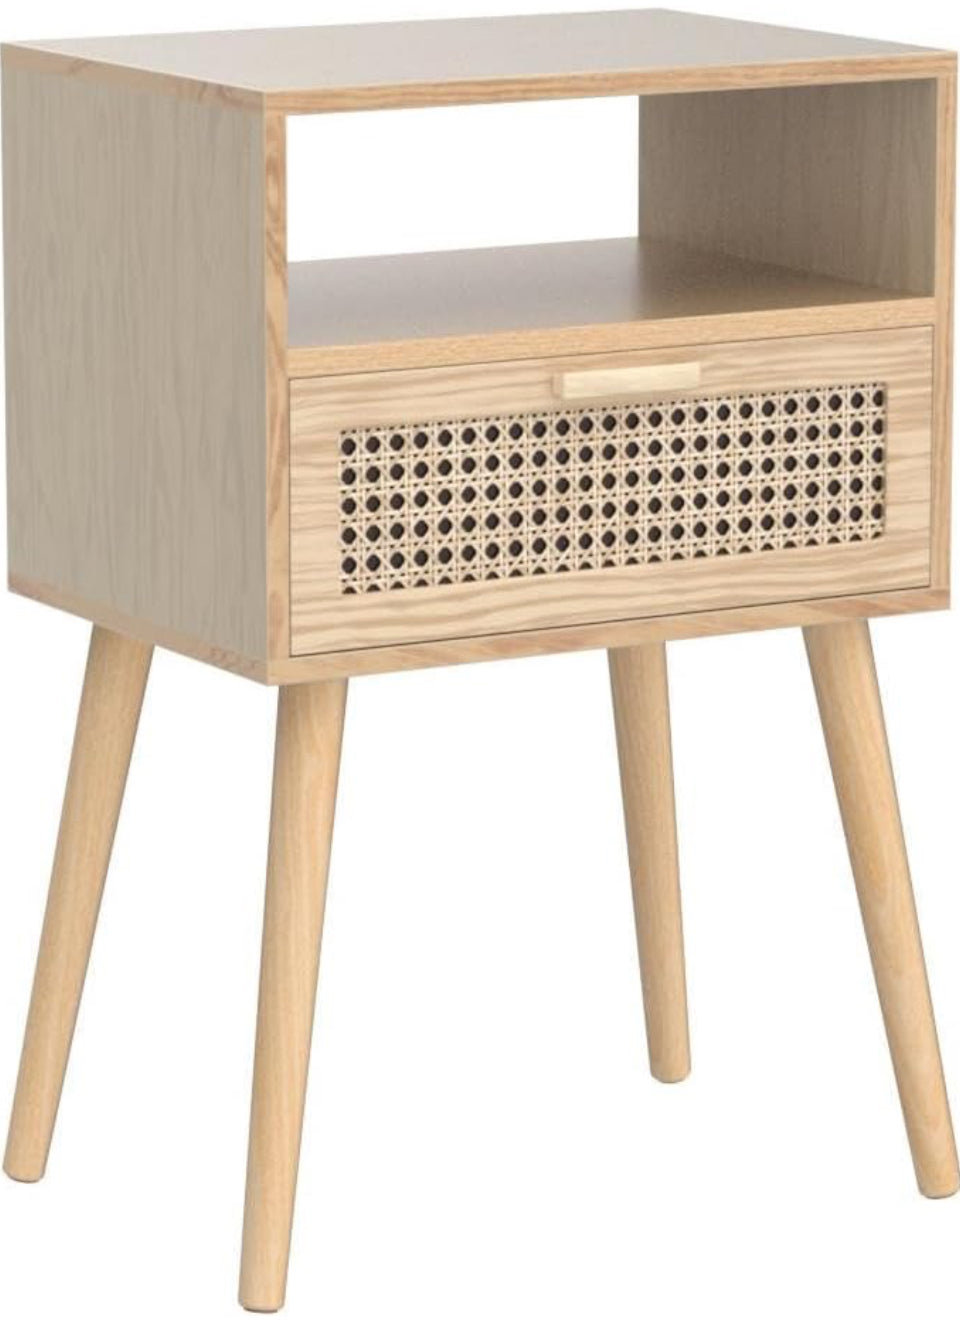 MaxSmeo Modern Nightstand Rattan Side End Table with Storage, for Living Room, Bedroom and Small Spaces, Accent Bedside Farmhouse Tables with Solid Wood - Selzalot